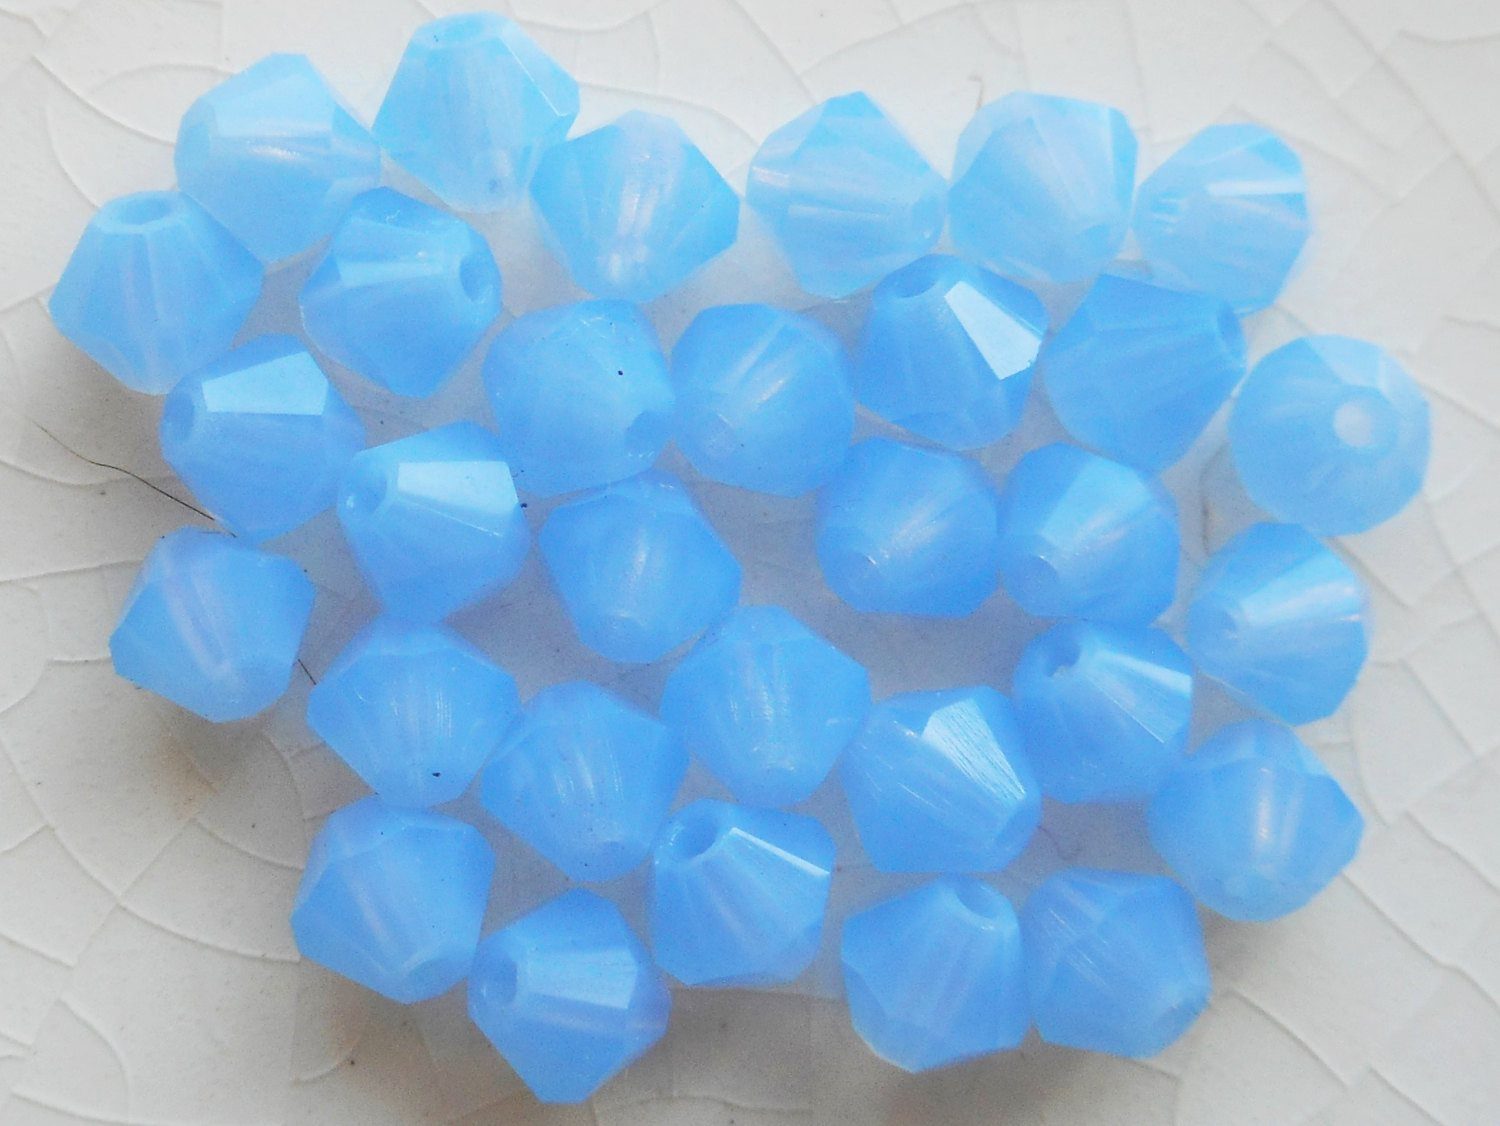 1400 Pcs, 4mm Trans Faceted Bicone Glass Crystal Beads Kit with 10